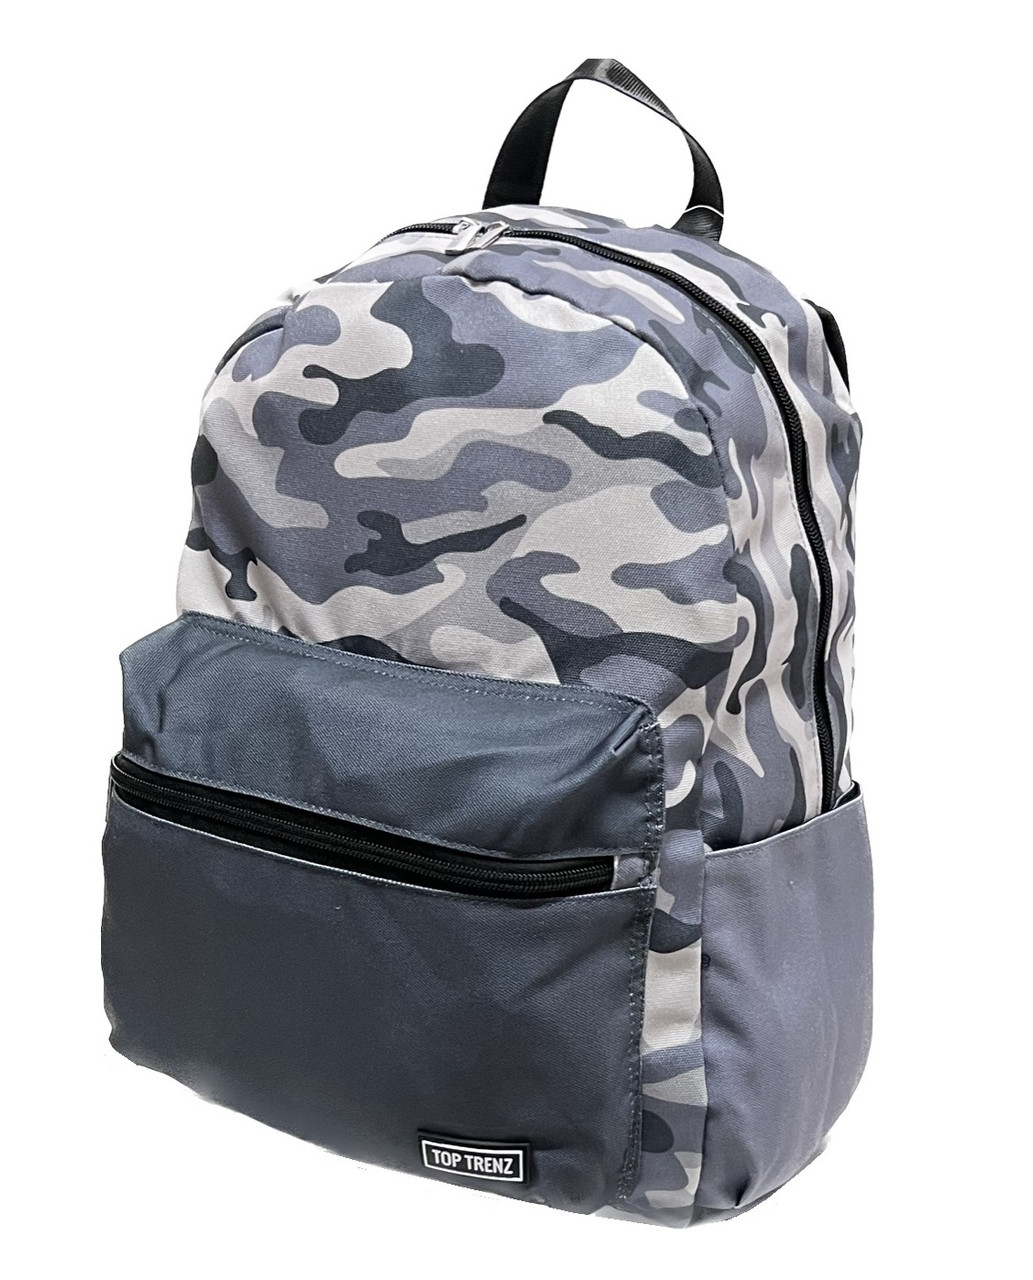 Top Trenz black and grey canvas backpack with a camo print for camp and school